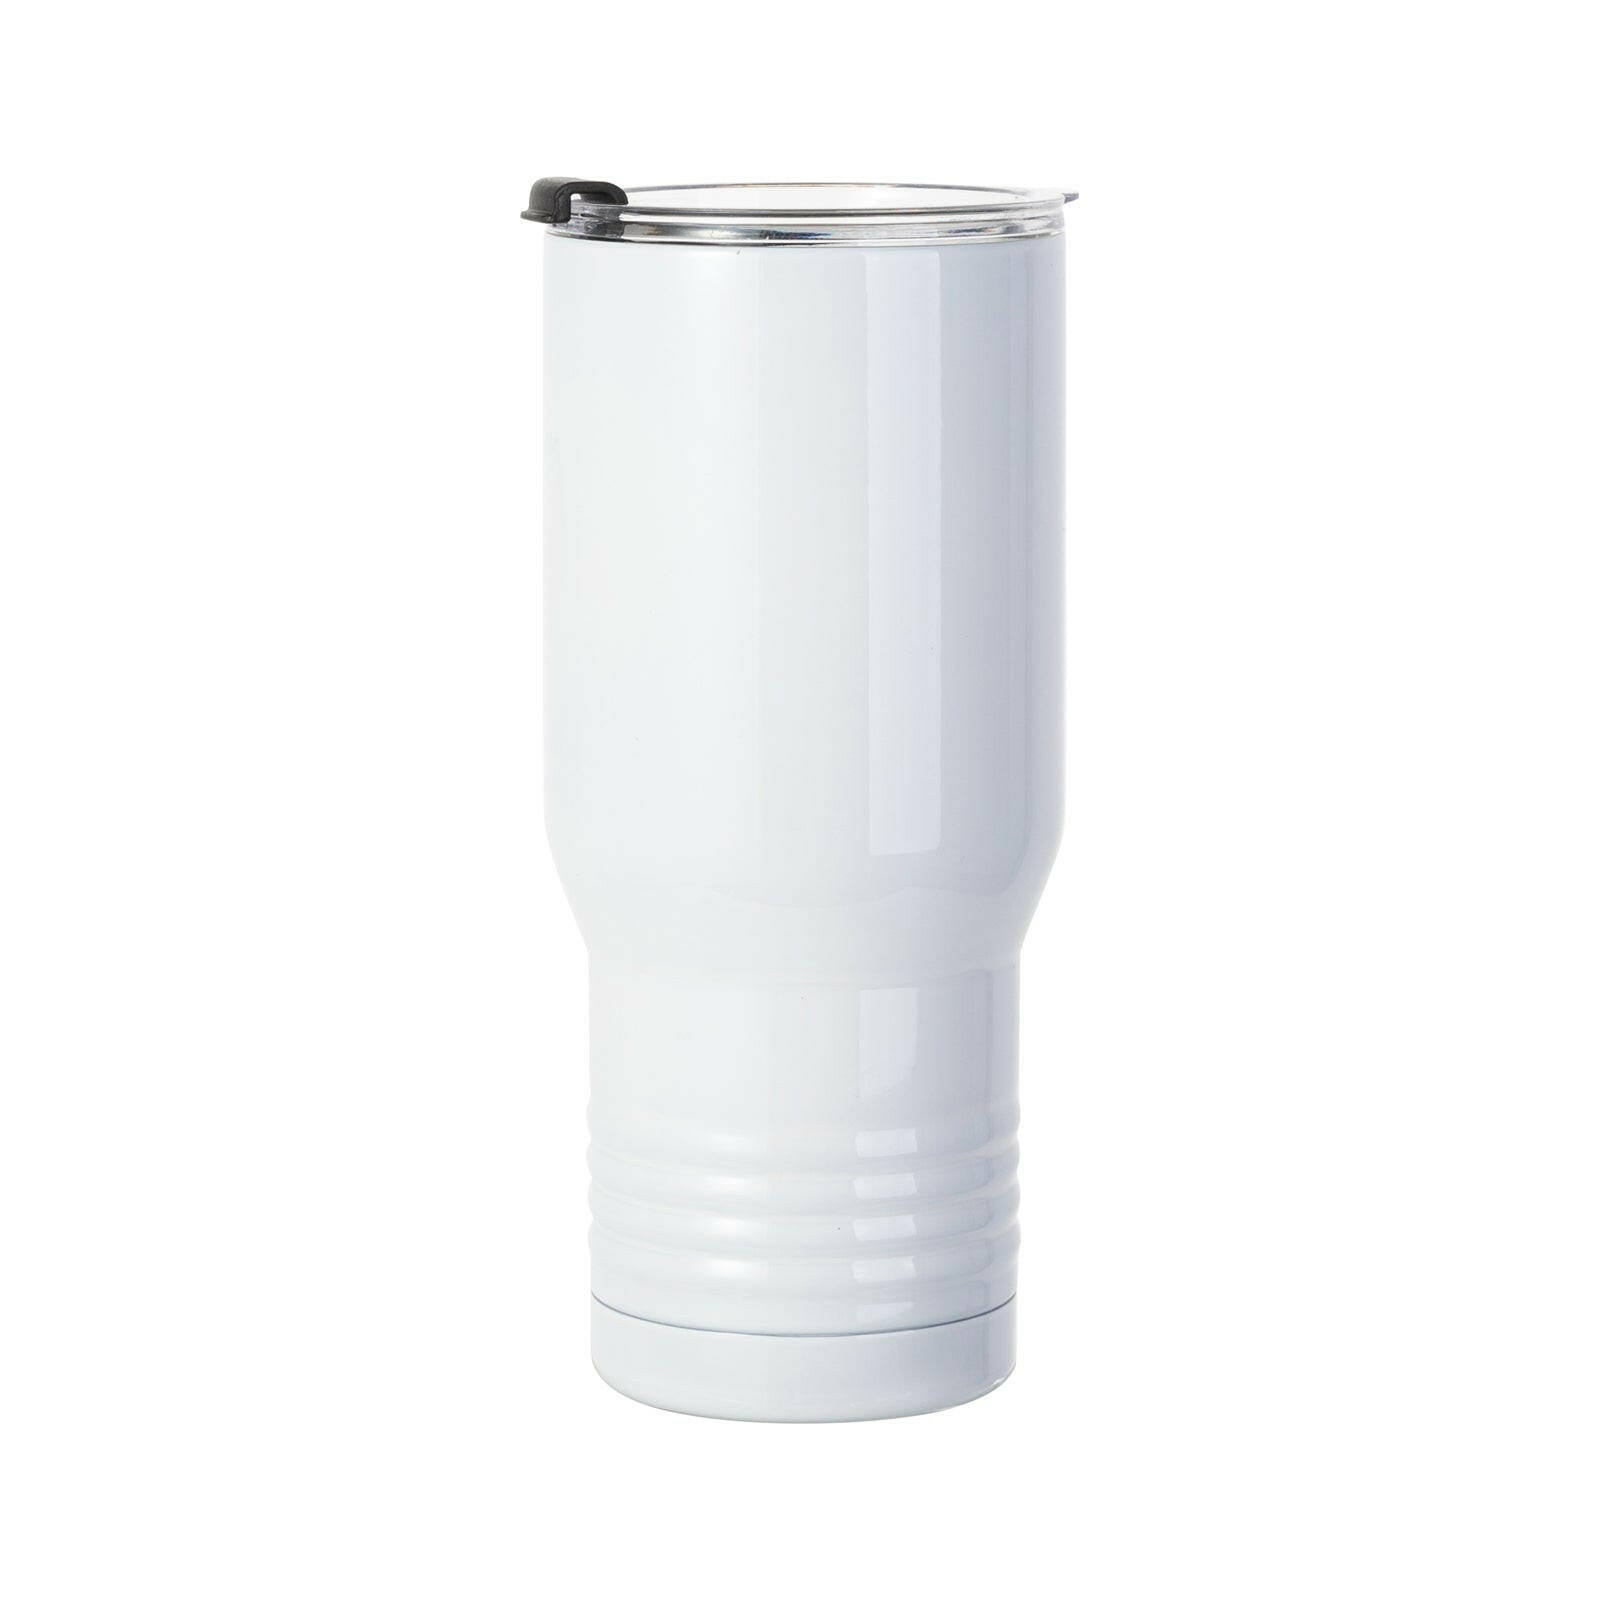 22oz Stainless Steel Ringneck Tumblers - 4 Pack.